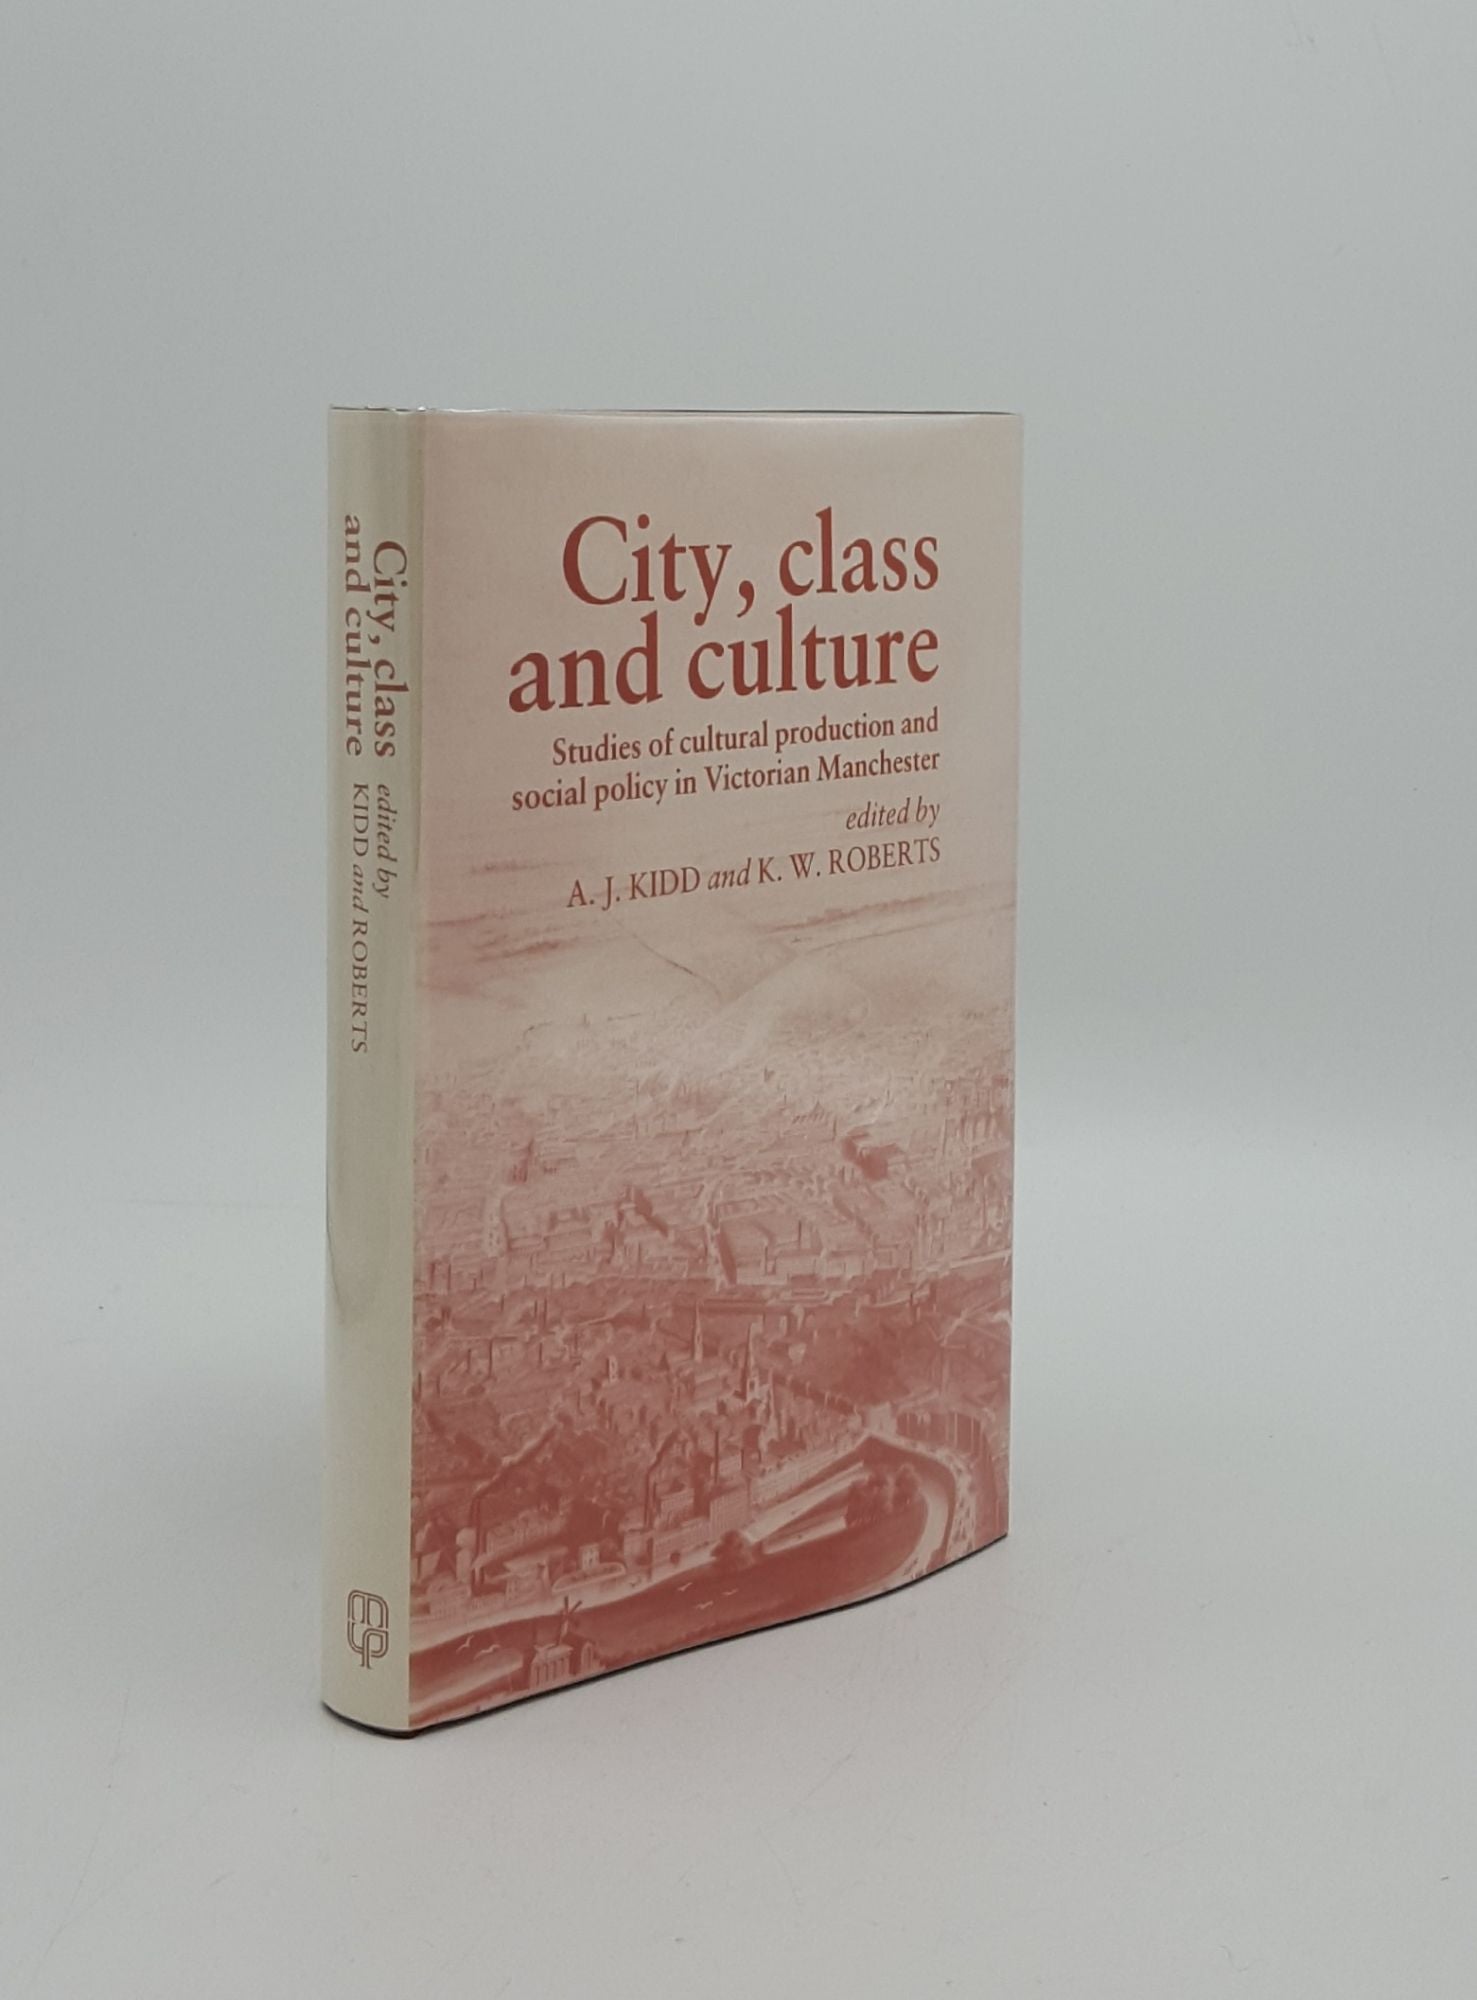 KIDD Alan J., ROBERTS Kenneth W. - City Class and Culture Studies of Social Policy and Cultural Production in Victorian Manchester